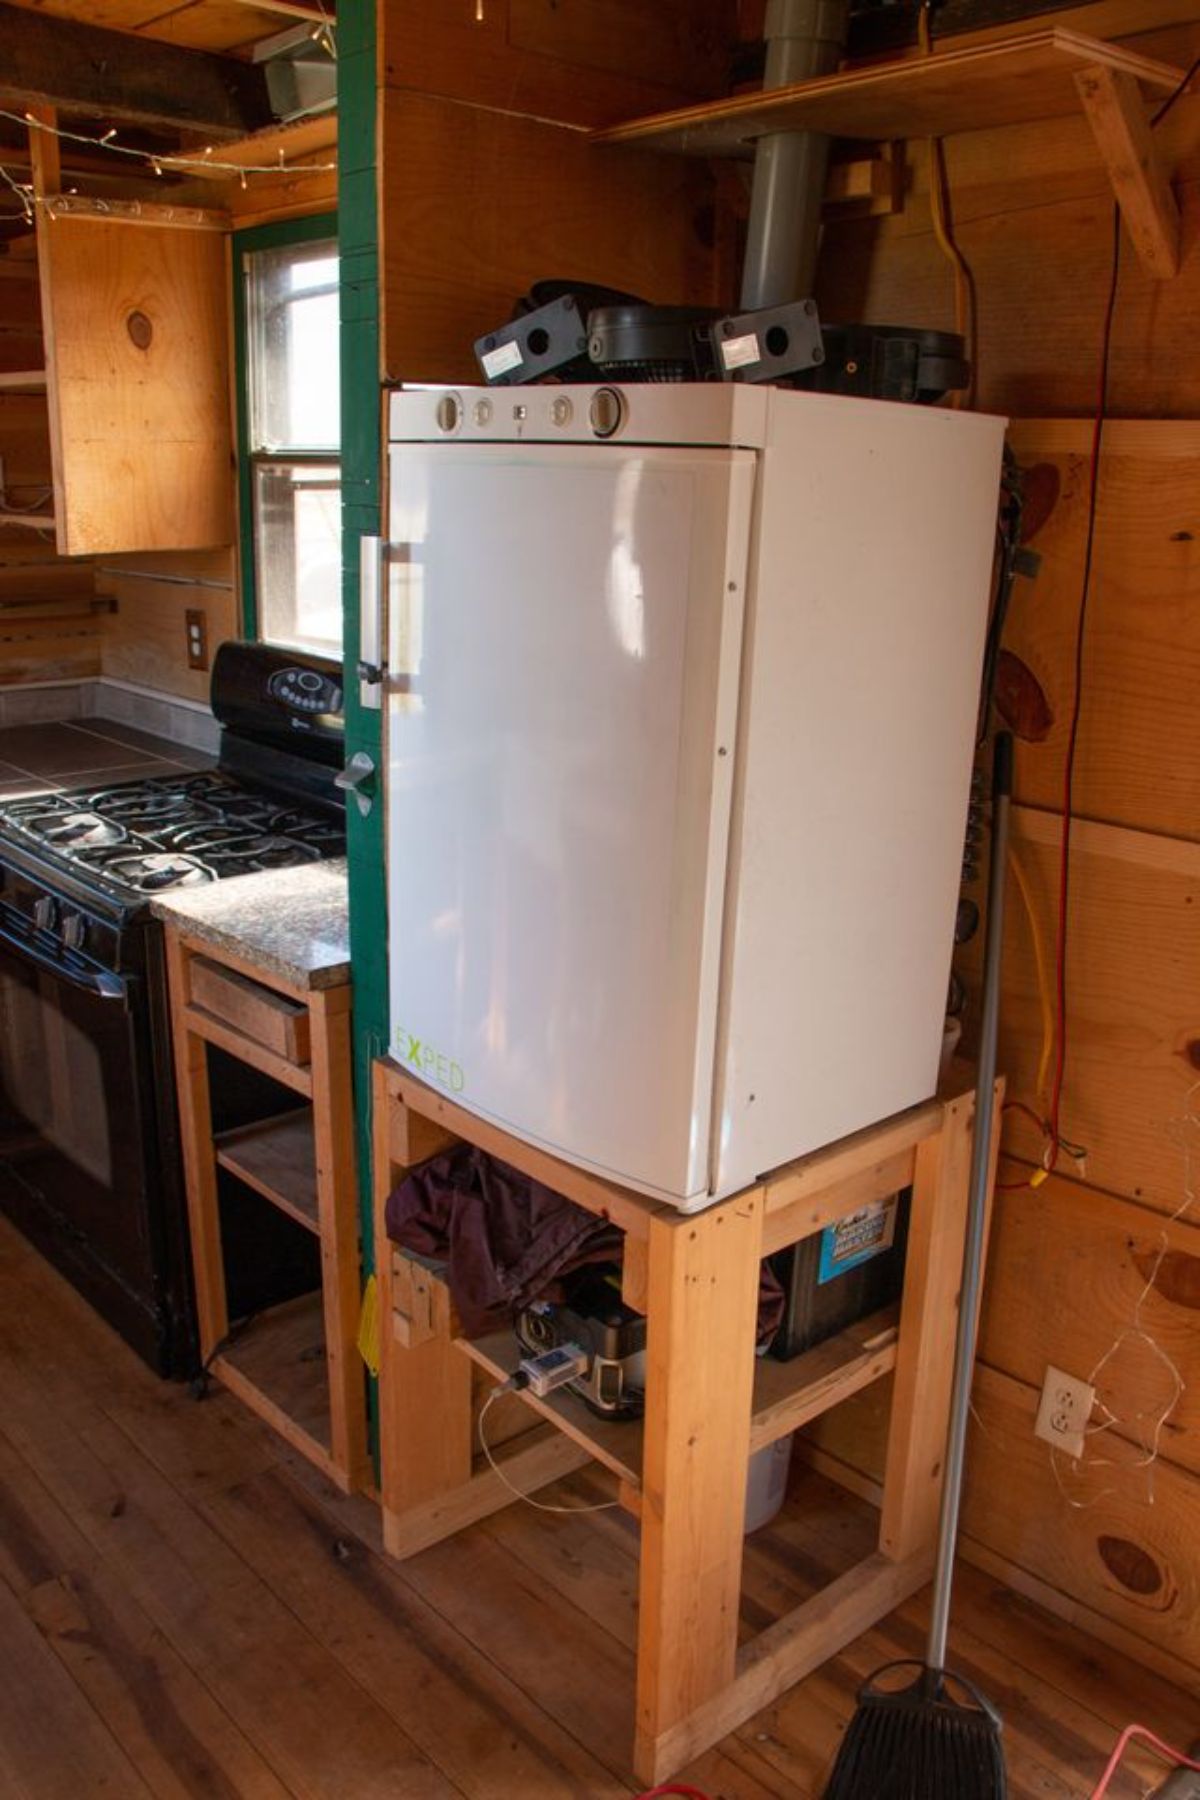 Small refrigerator in the kitchen of Rustic 22' Trailer